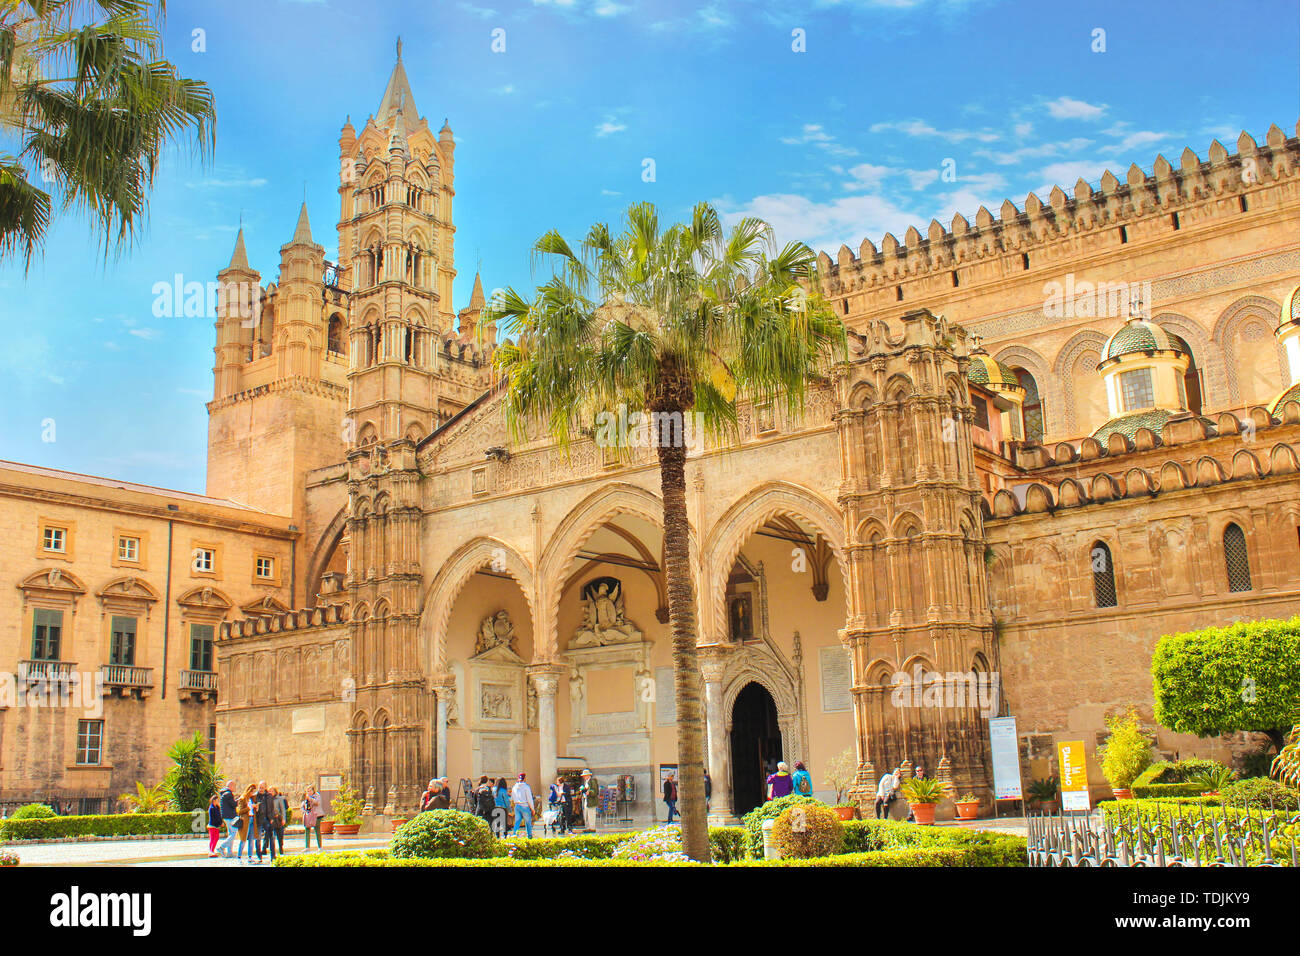 Palermo, Sicily, Italy - Apr 11th 2019: Palermo Cathedral with tourists in front. Roman Catholic church, Cathedral of the Assumption of Virgin Mary. Famous local landmark. Stock Photo